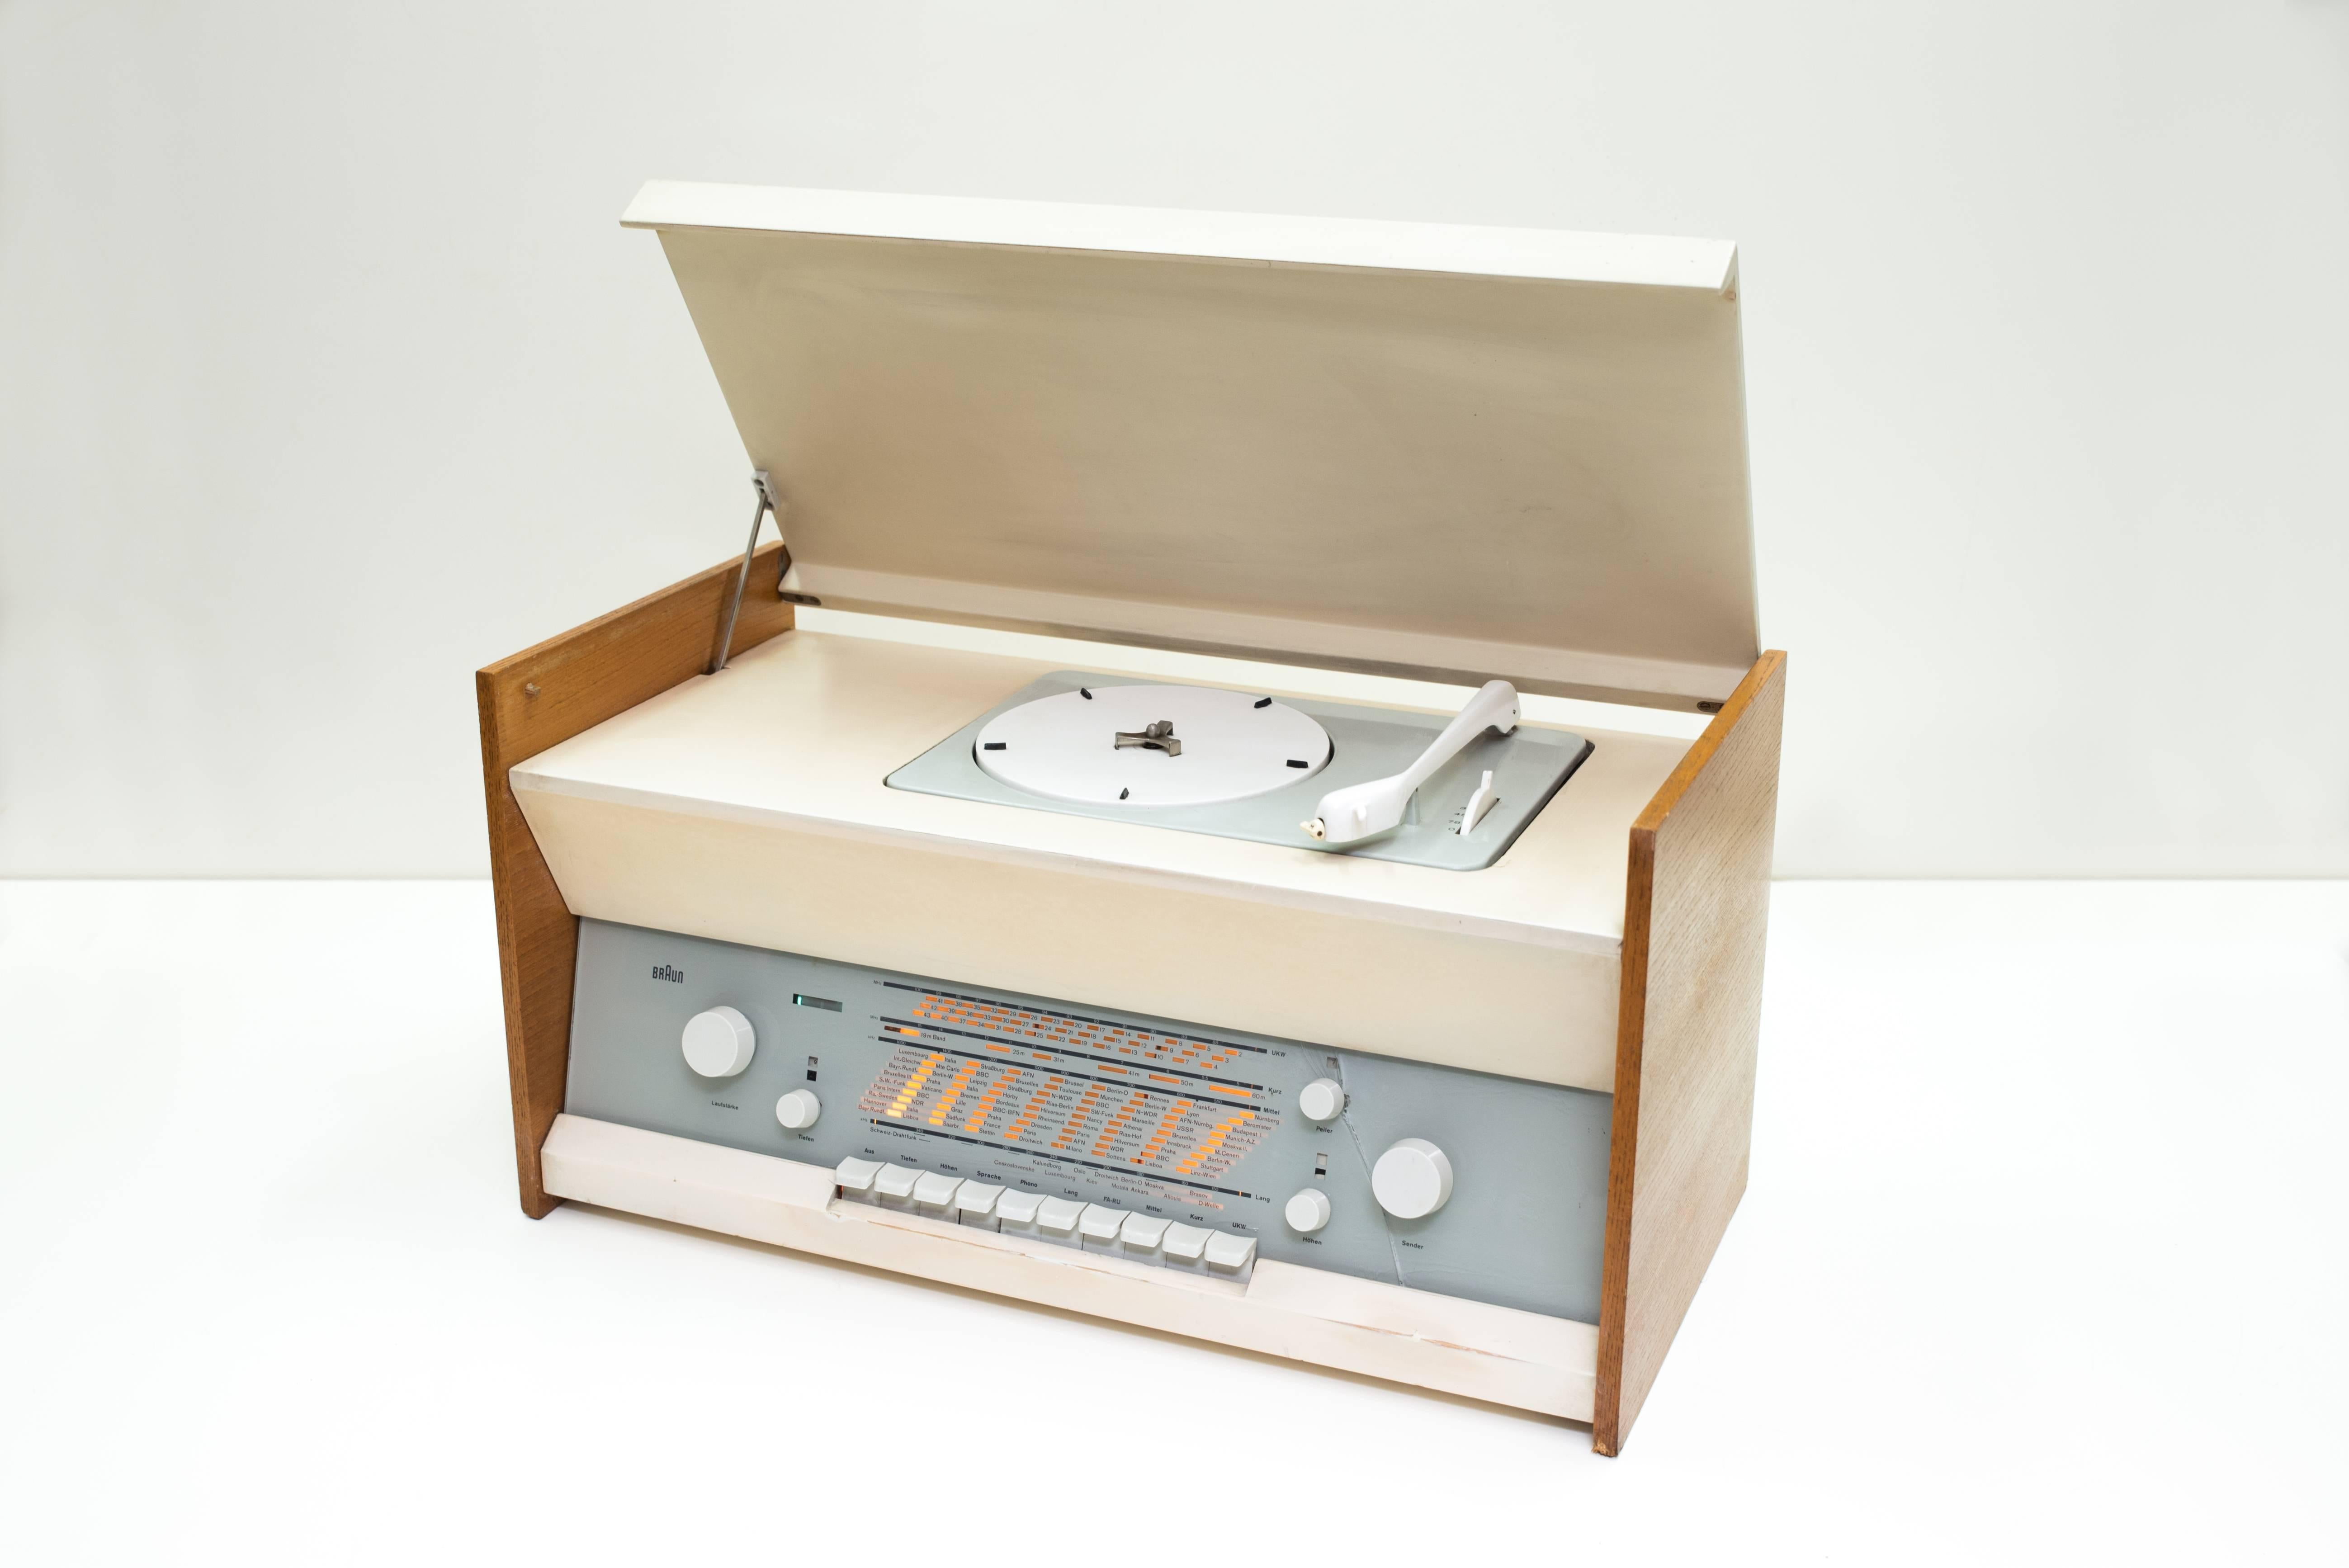 Braun radio turntable series Atelier 1-81 by Dieter Rams.
The turntable plays at all speeds and the cart is brand new. The radio has a good reception even without an external antenna. All switches and buttons works (treble, bass) without scratches